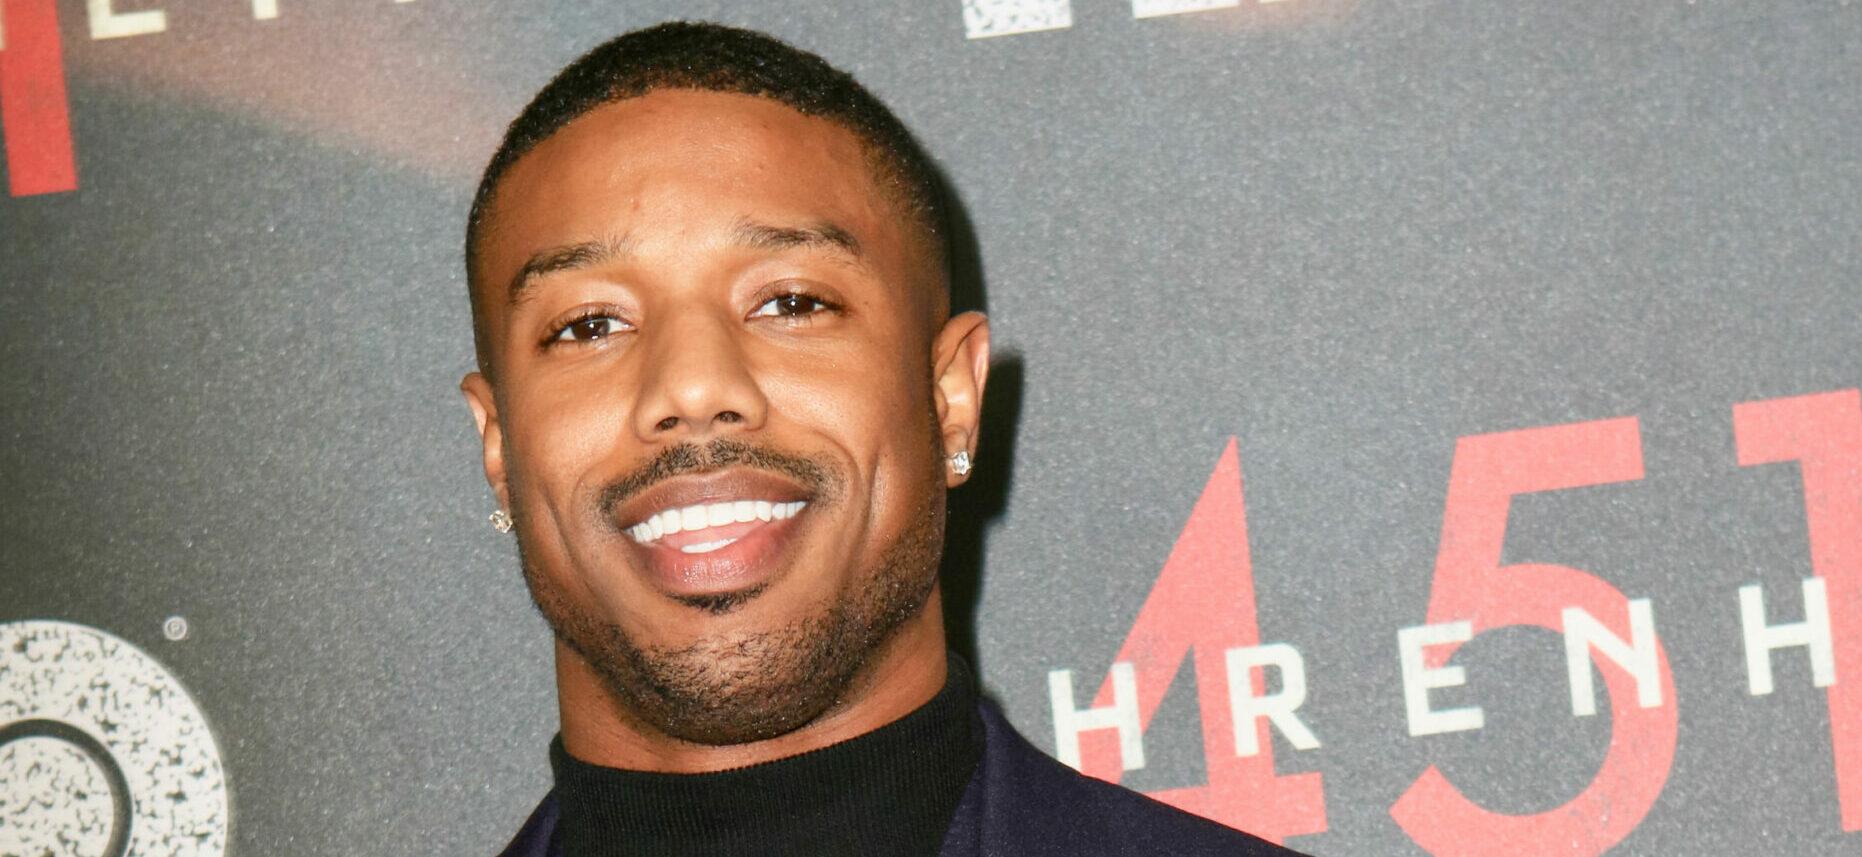 Steve Harvey Gives Praise For Michael B. Jordan’s Efforts In His Relationship With His Daughter, Lori